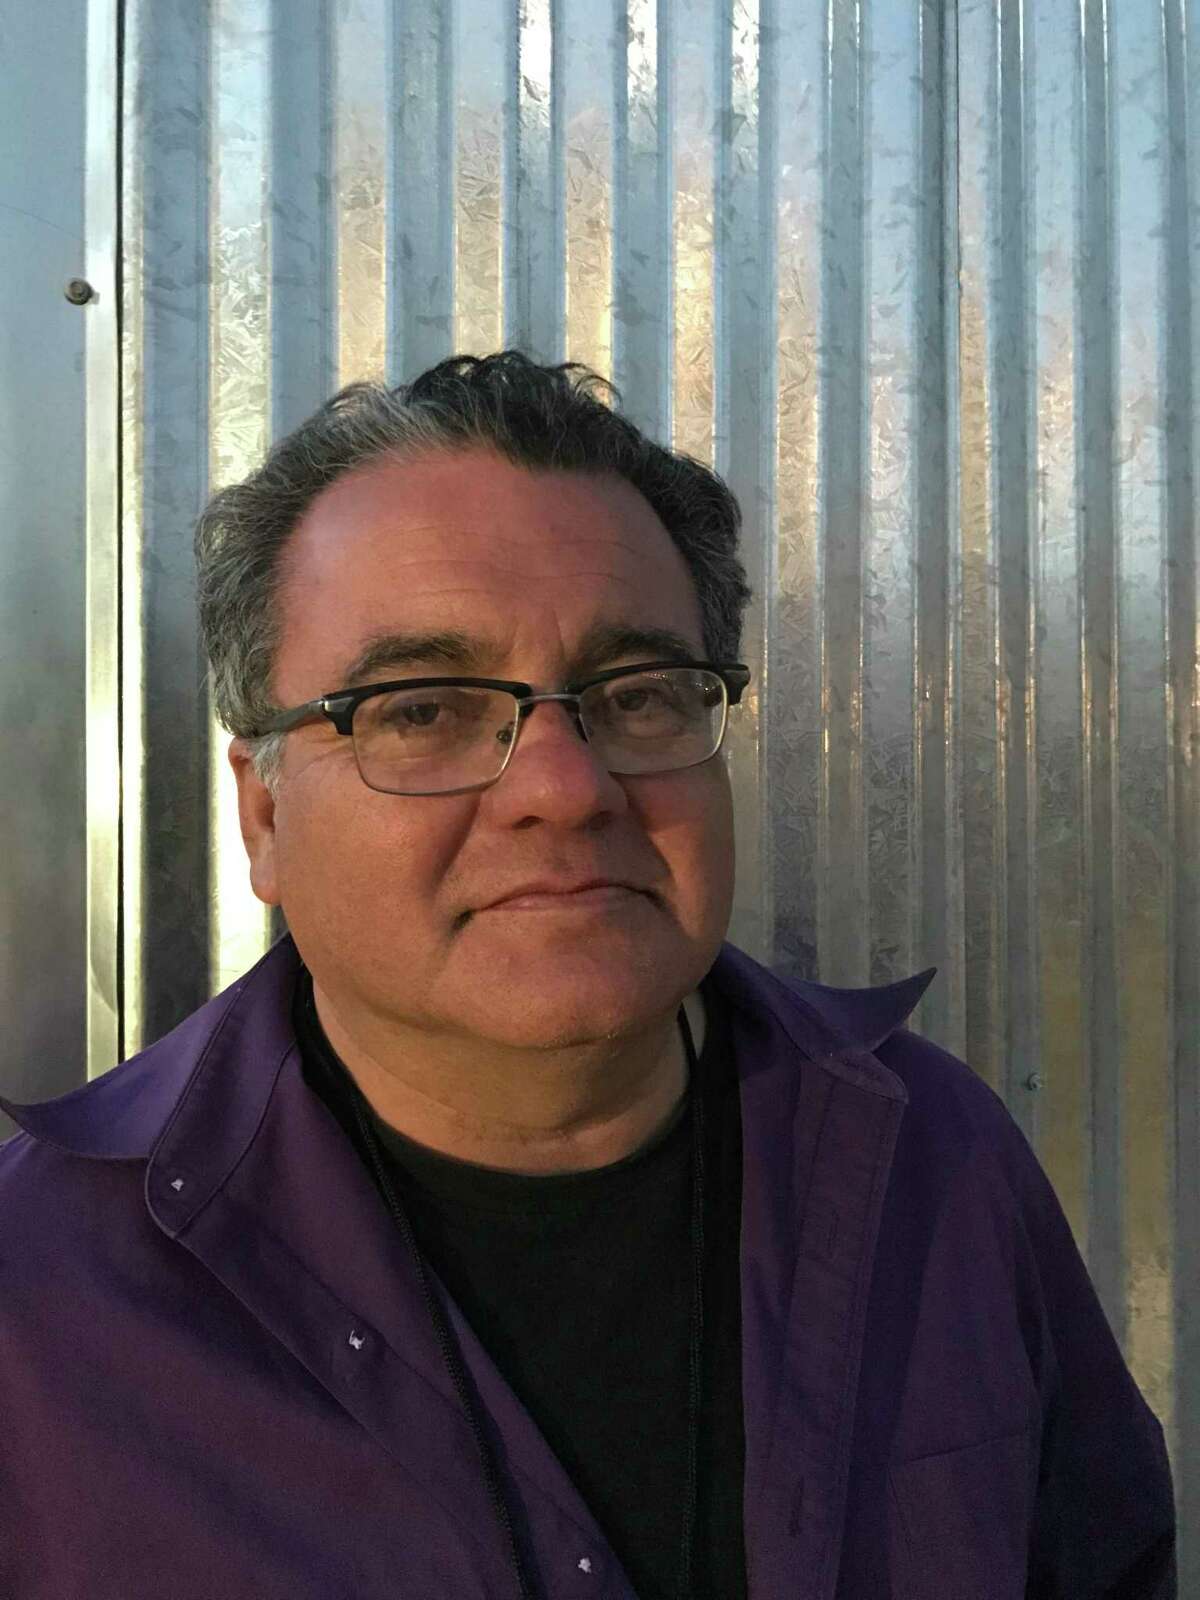 Native El Pasoan David Romo considers himself a micro-historian alert to non-traditional sources of historical information.